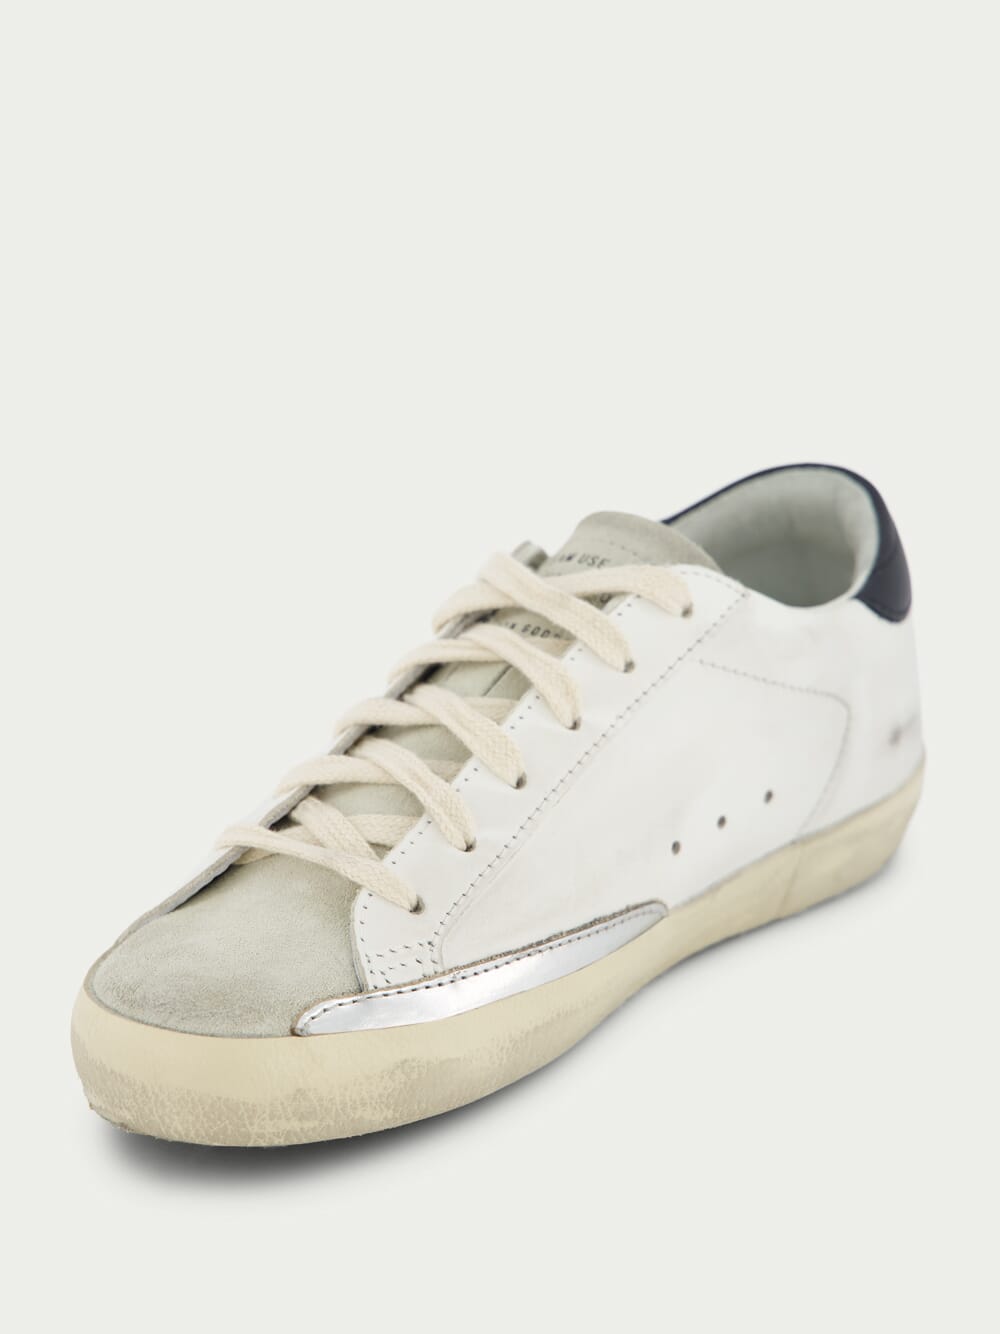 Golden GooseSuper-Star Distressed Lace-Up Sneakers at Fashion Clinic